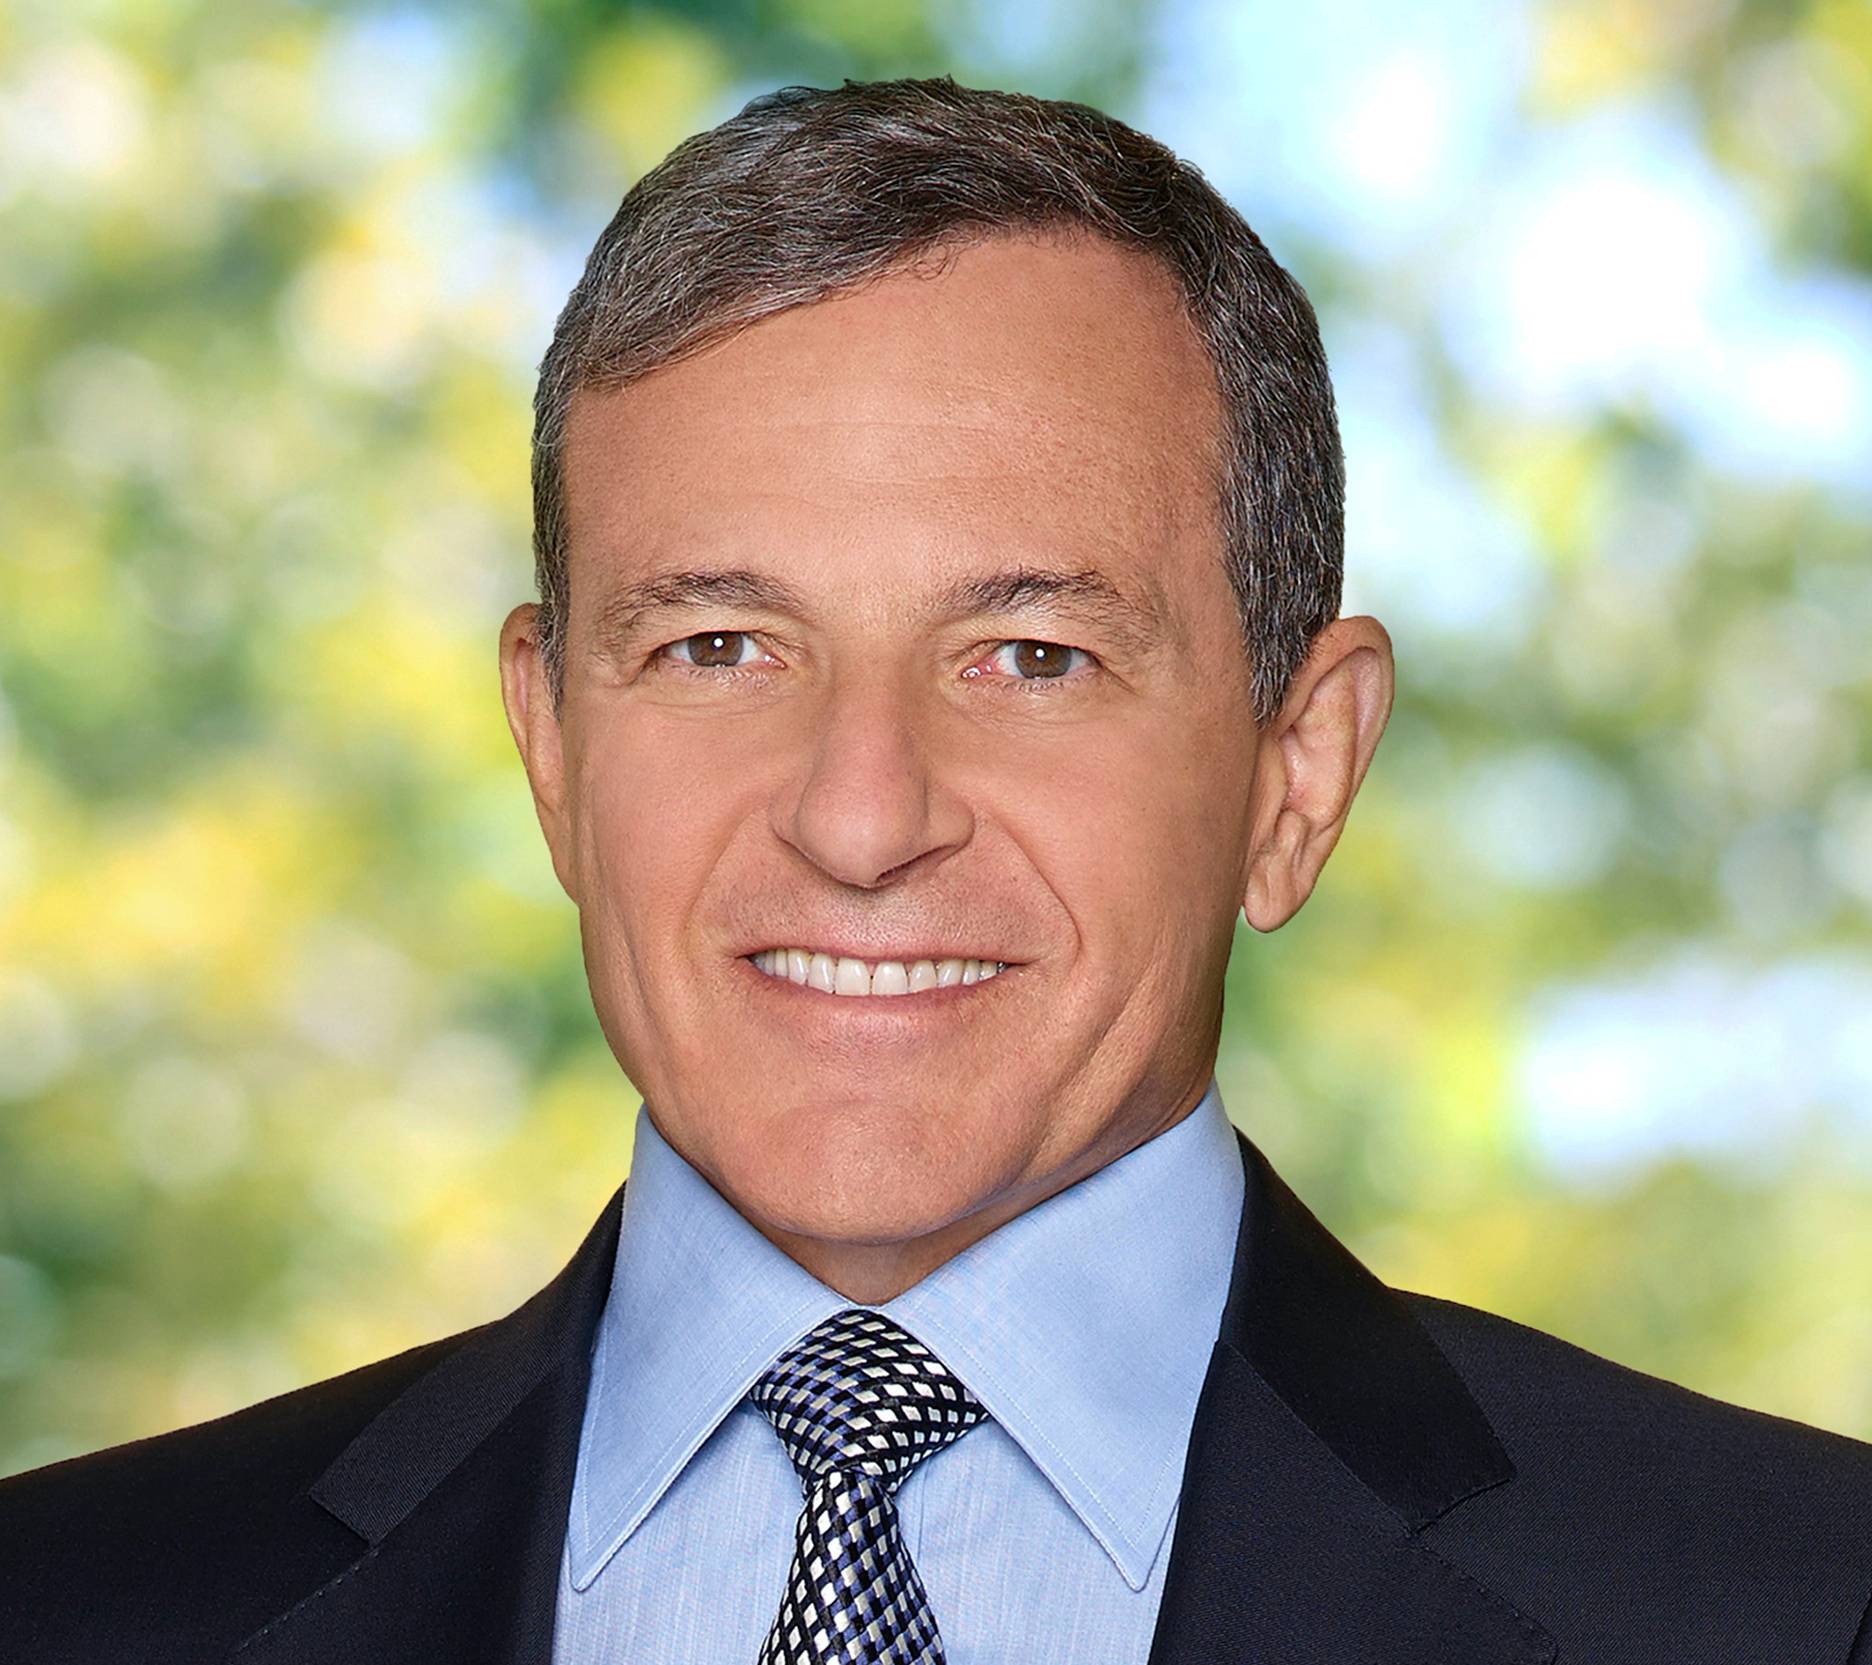 Iger tells fans 'we will continue to do our best to exceed your highest expectations.'